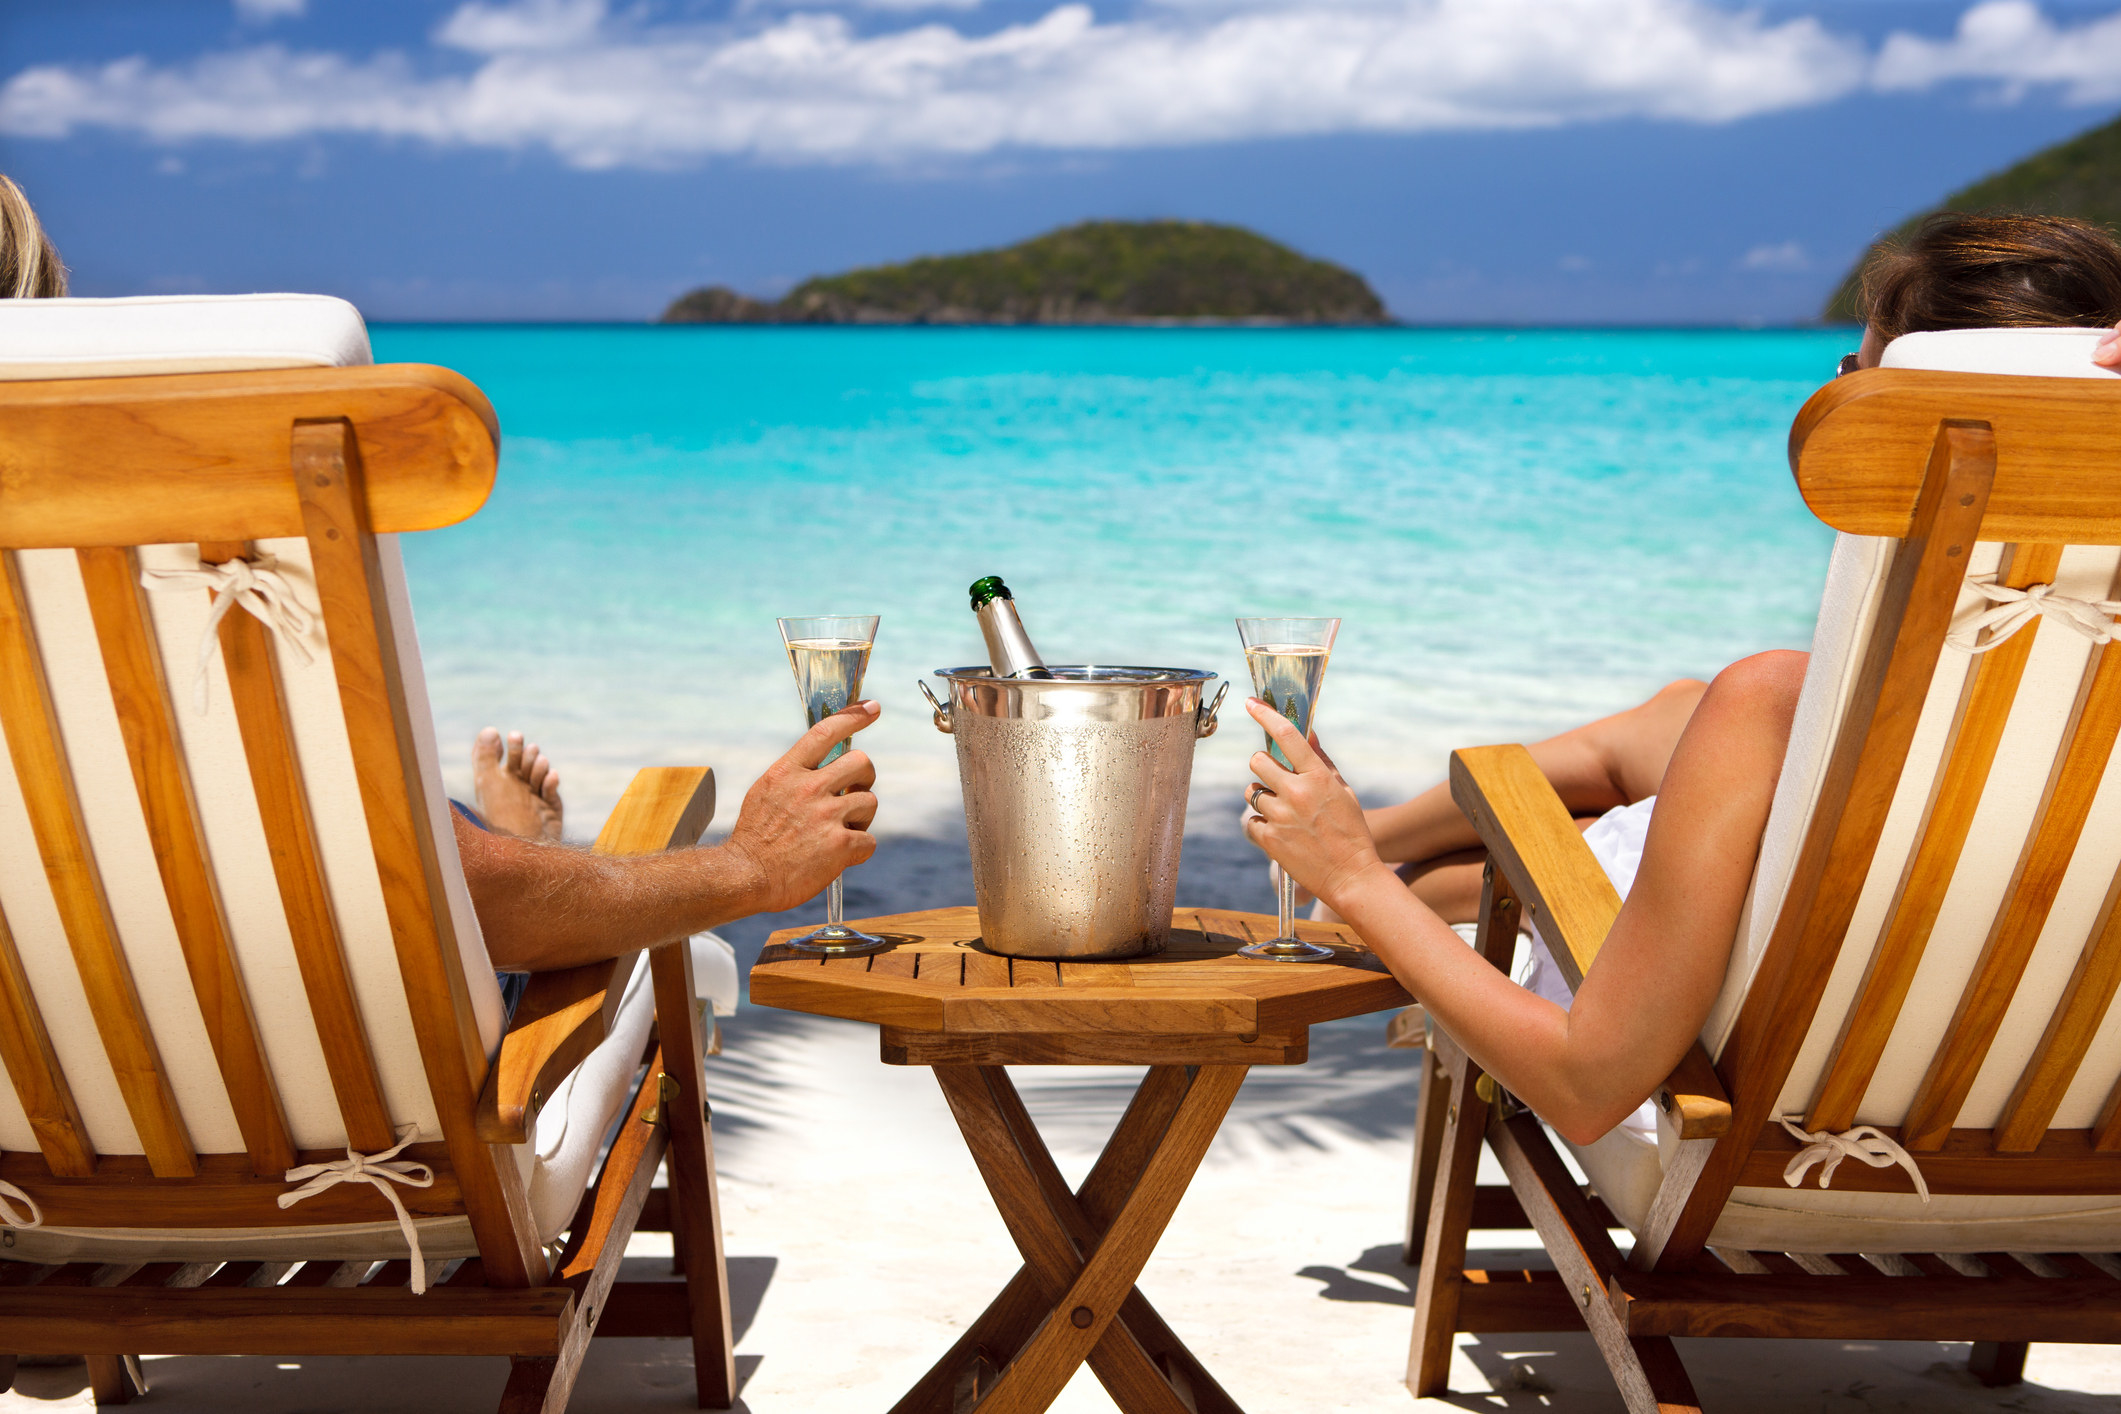 A couple relaxes in chairs on the beach outside at a luxury resort